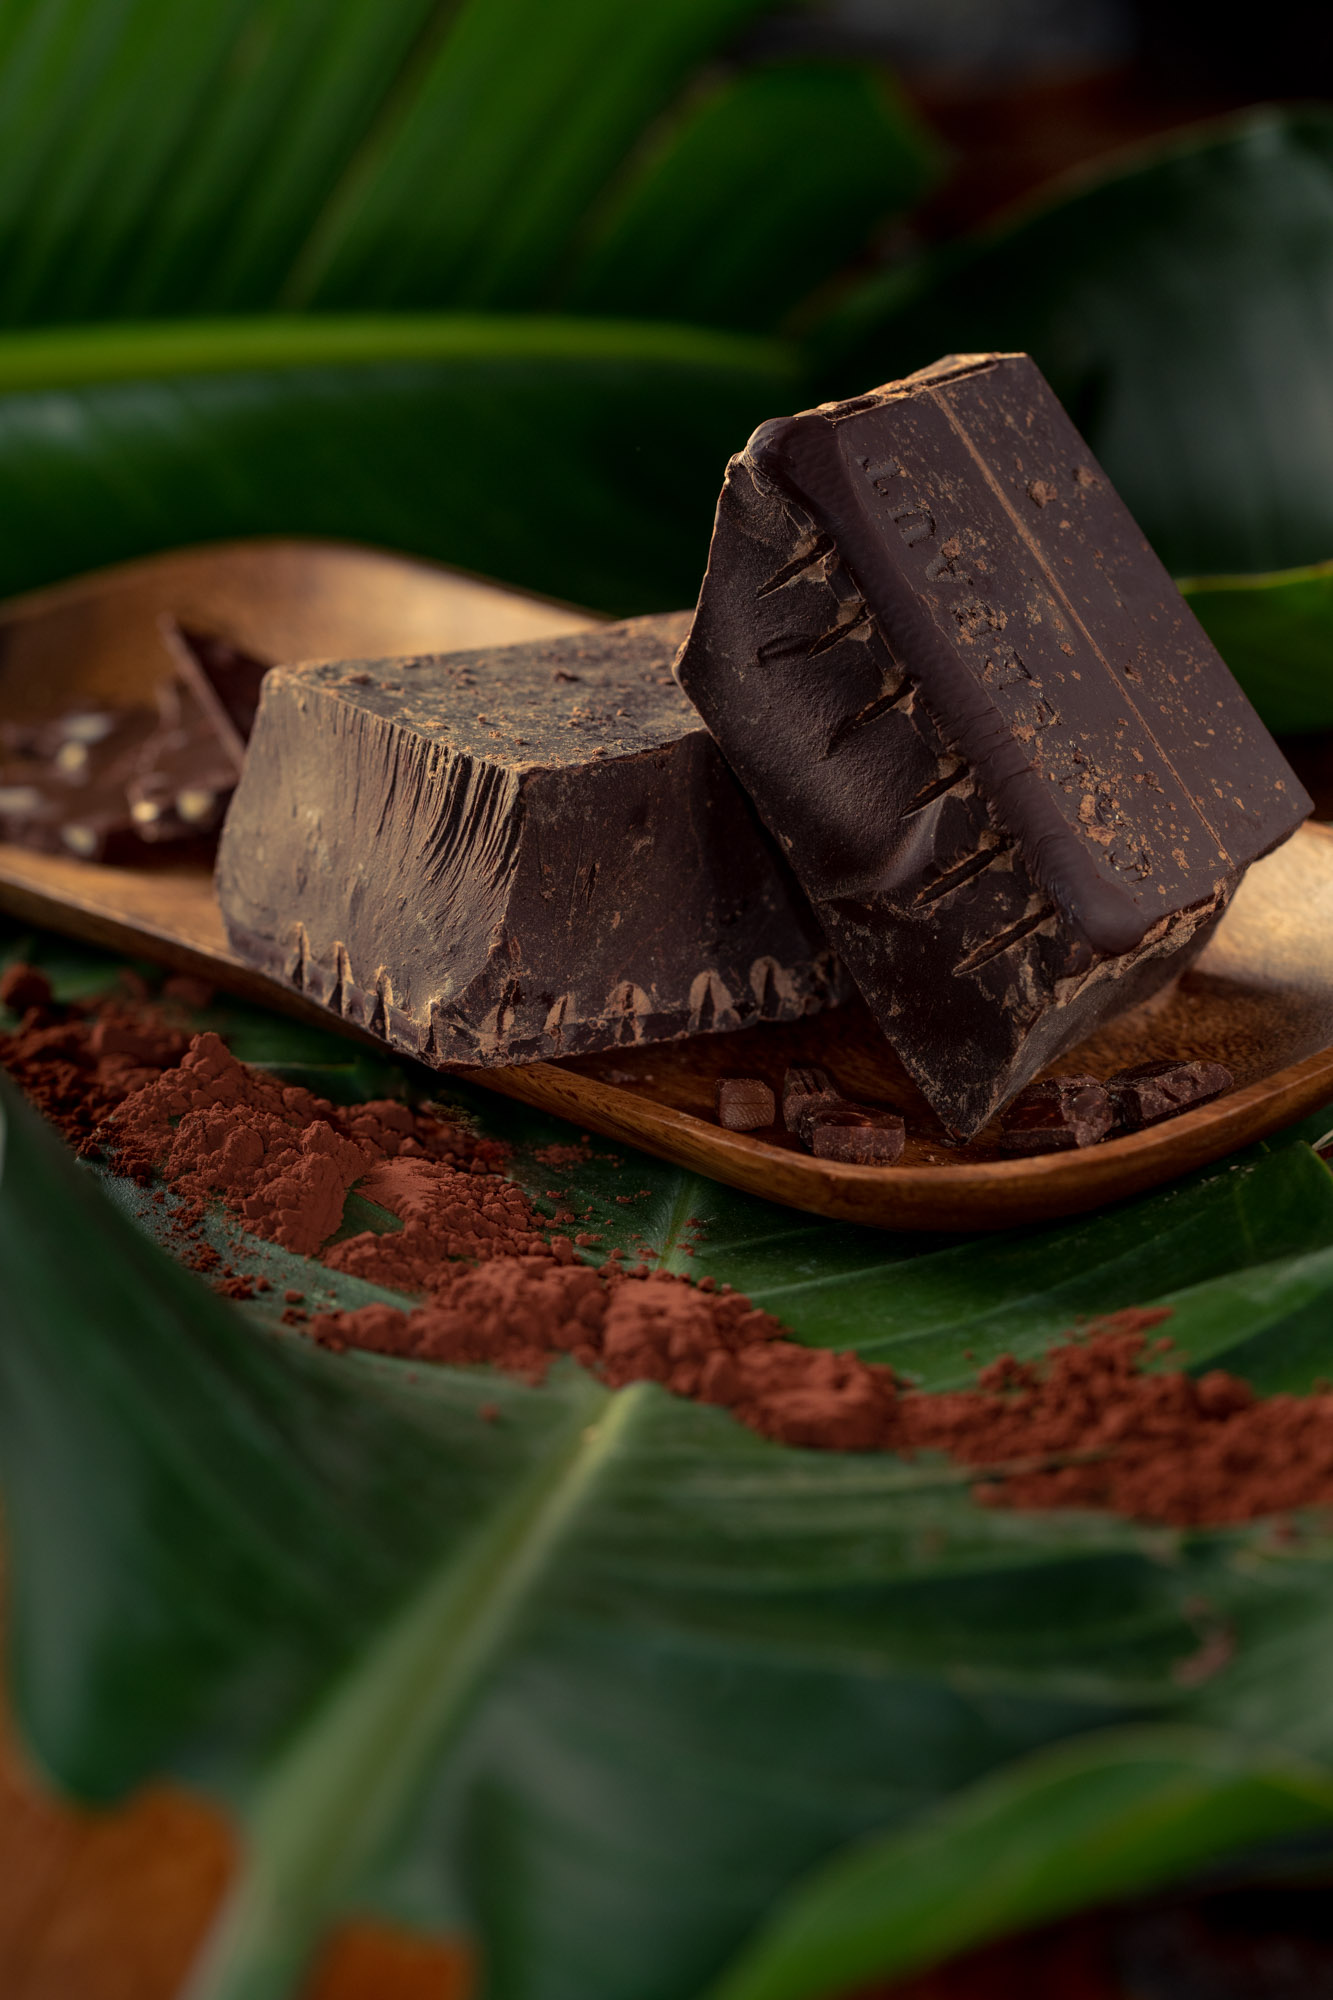 sexy shot of ingredients used to make chocolate